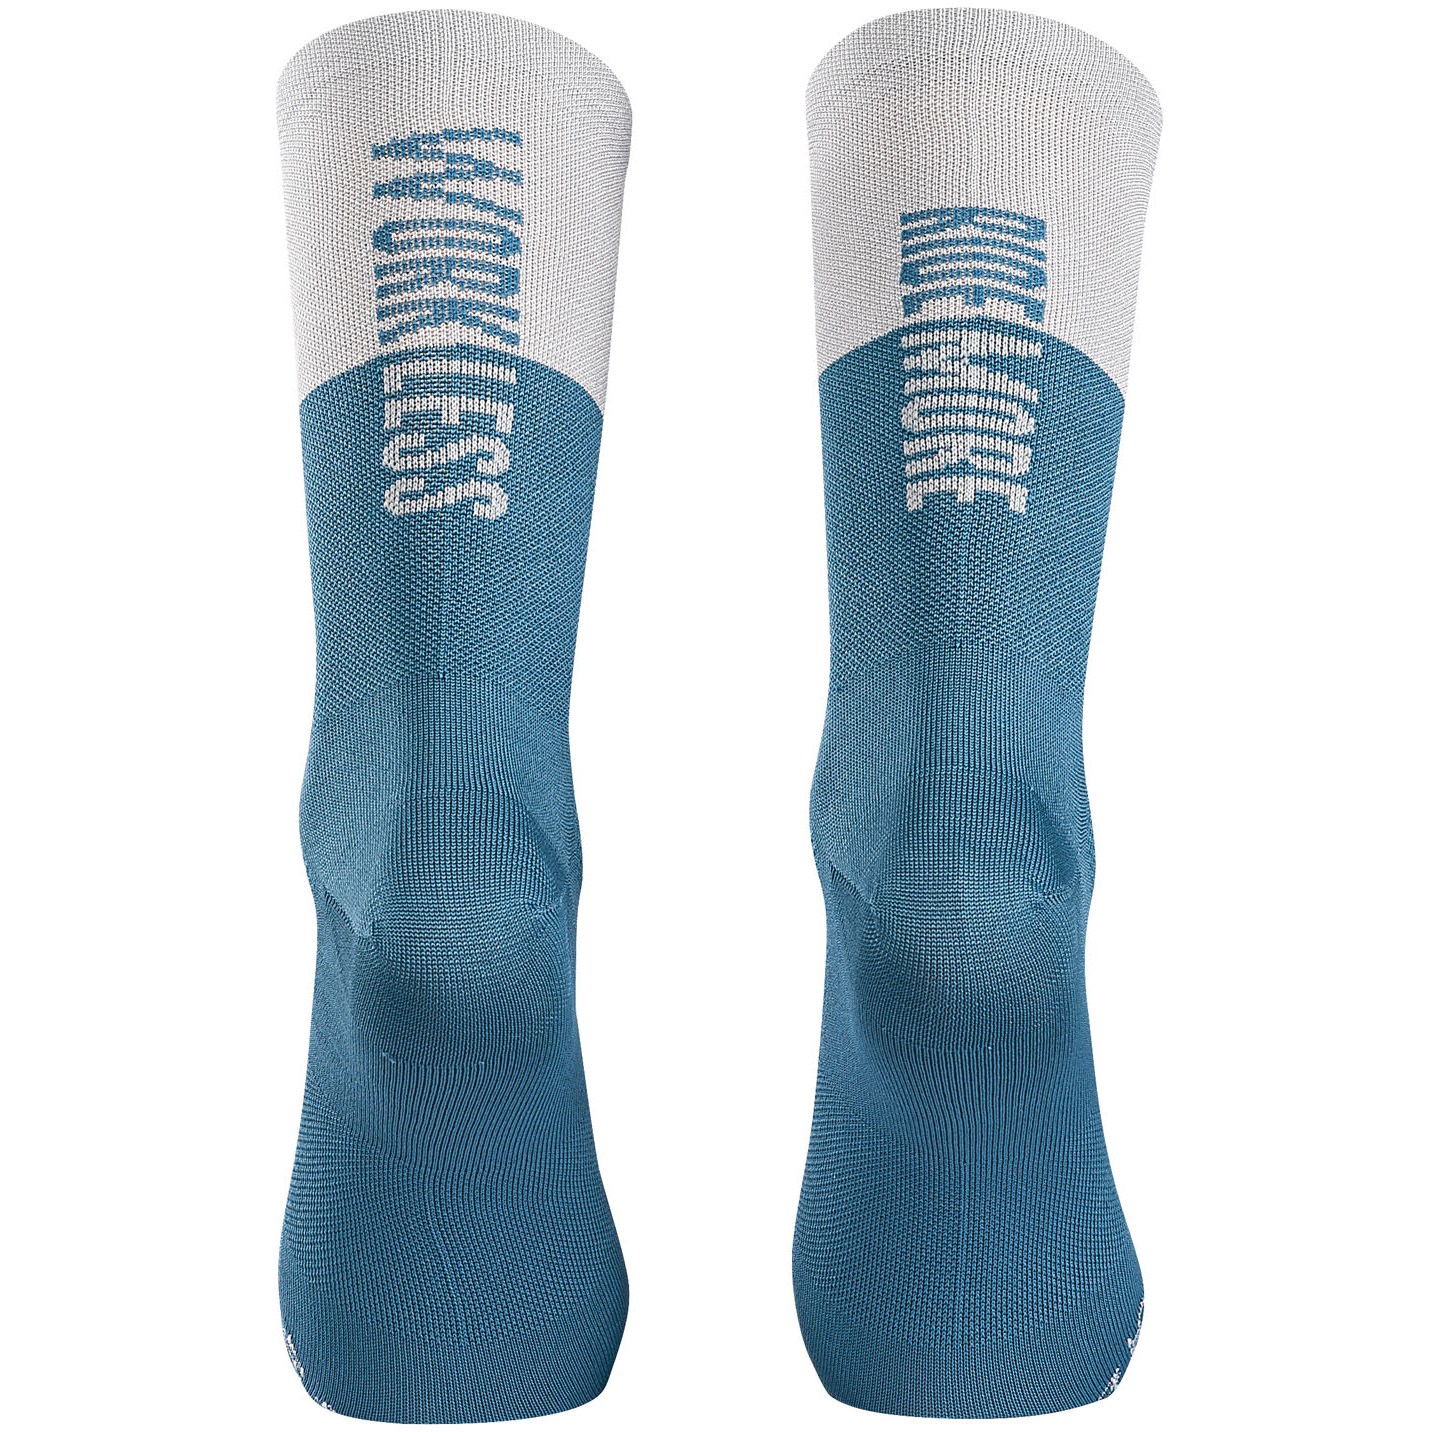 Picture of Northwave Work Less Ride More Socks - deep blue/light grey 29